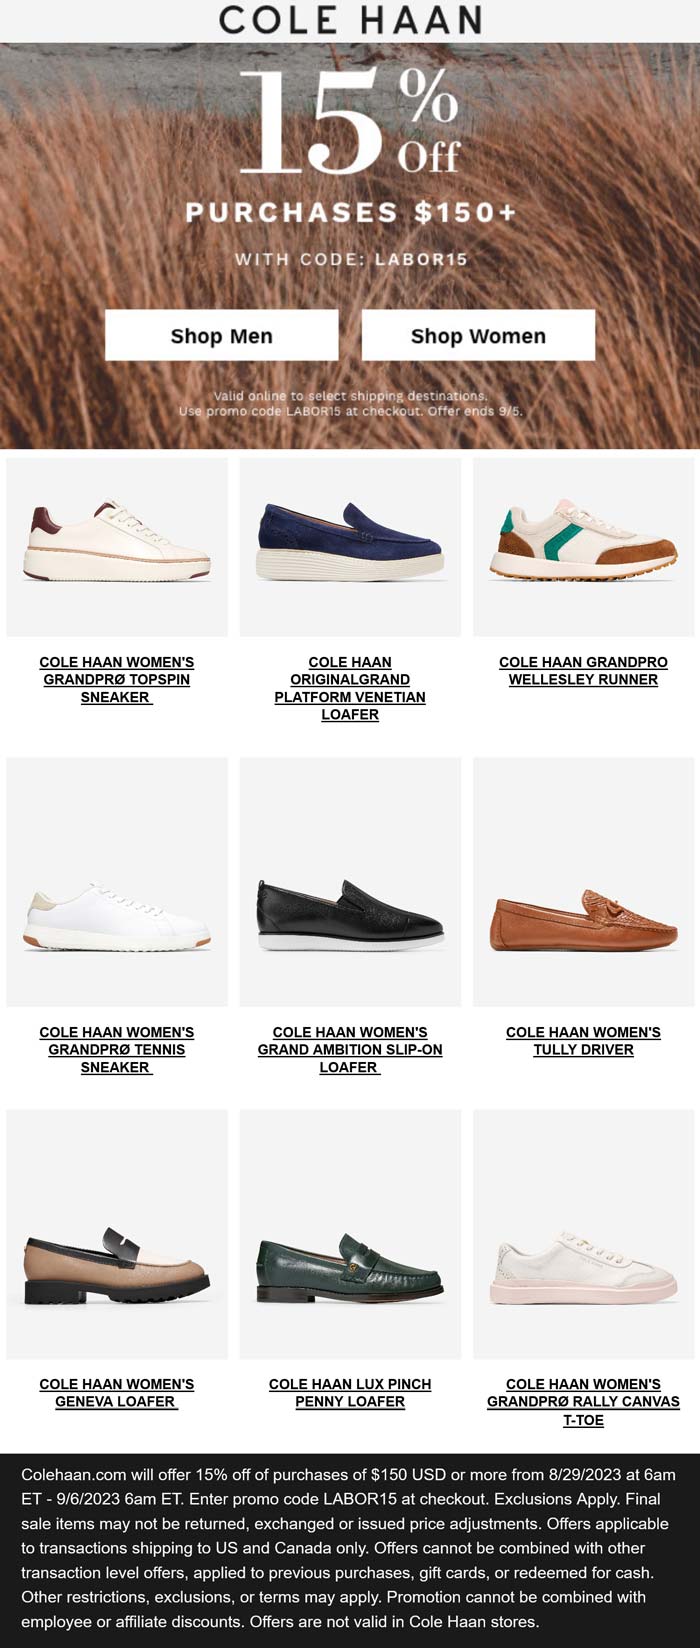 Cole Haan stores Coupon  15% off $150 online today at Cole Haan shoes via promo code LABOR15 #colehaan 